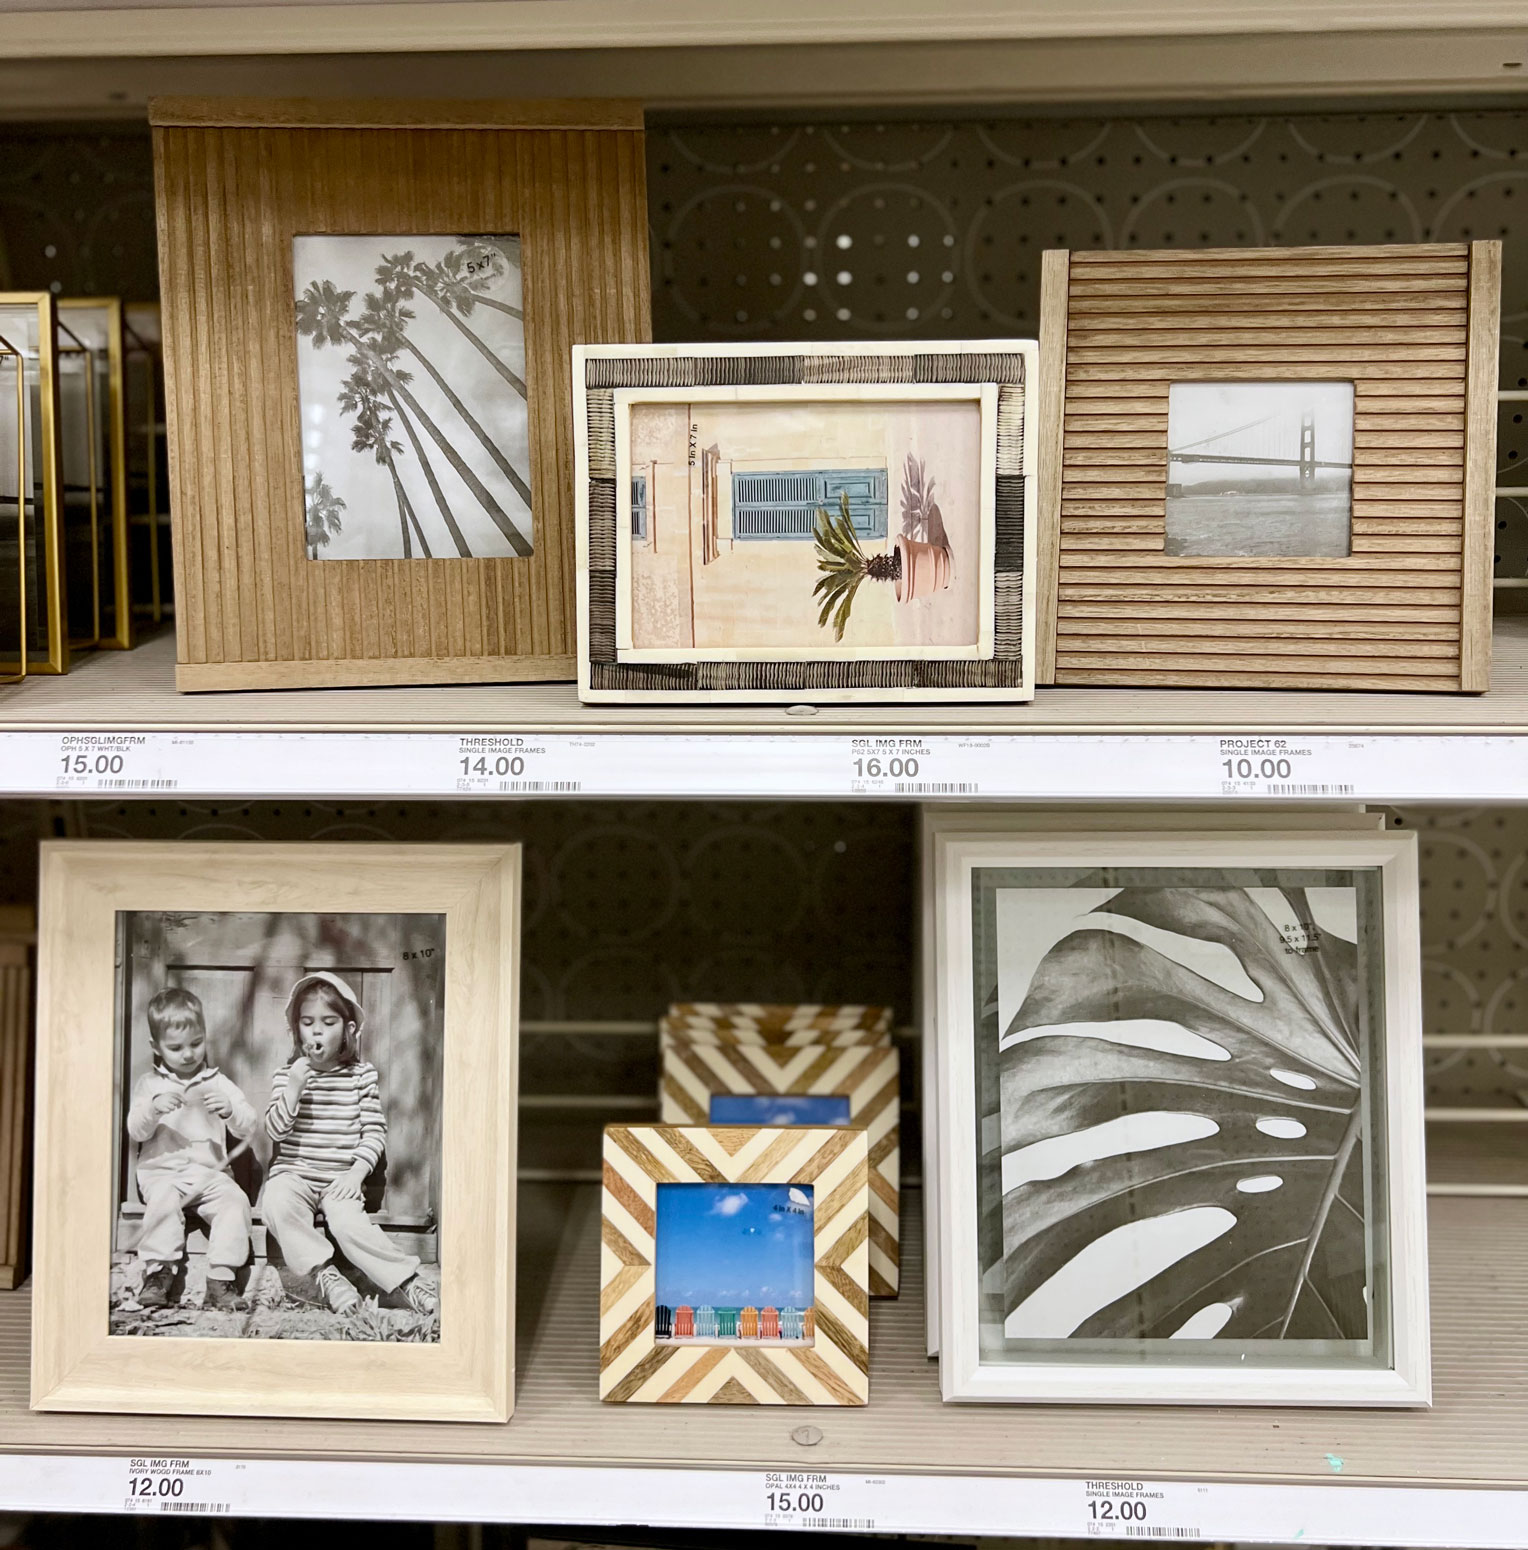 Home Accessories From Target photo frames